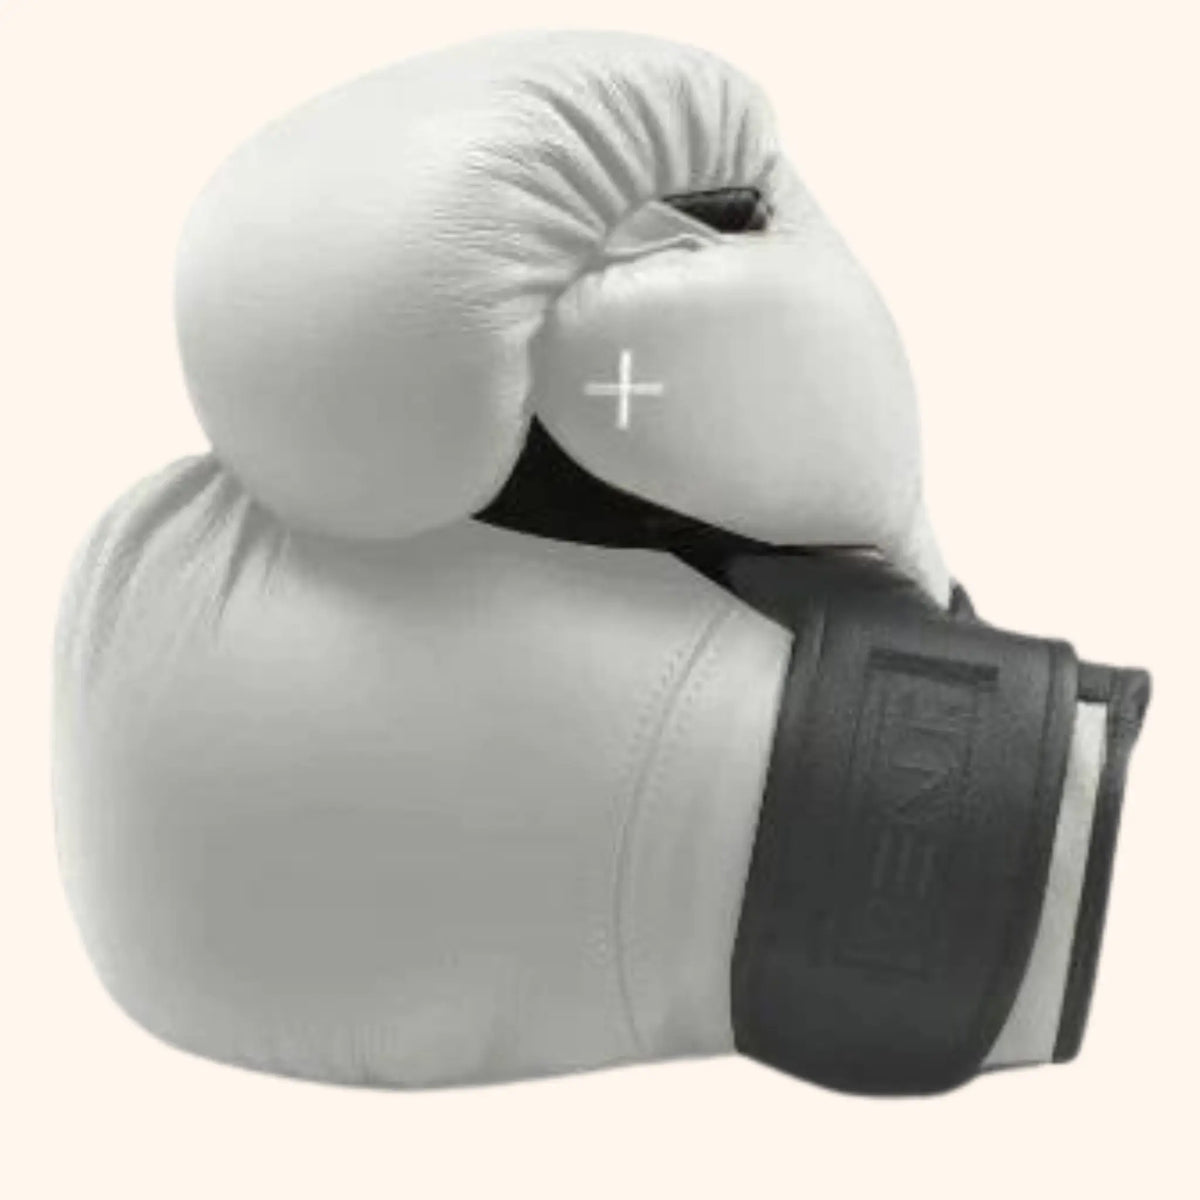 PENT | RAXA Luxury Genuine Leather Boxing Gloves -Small PENT